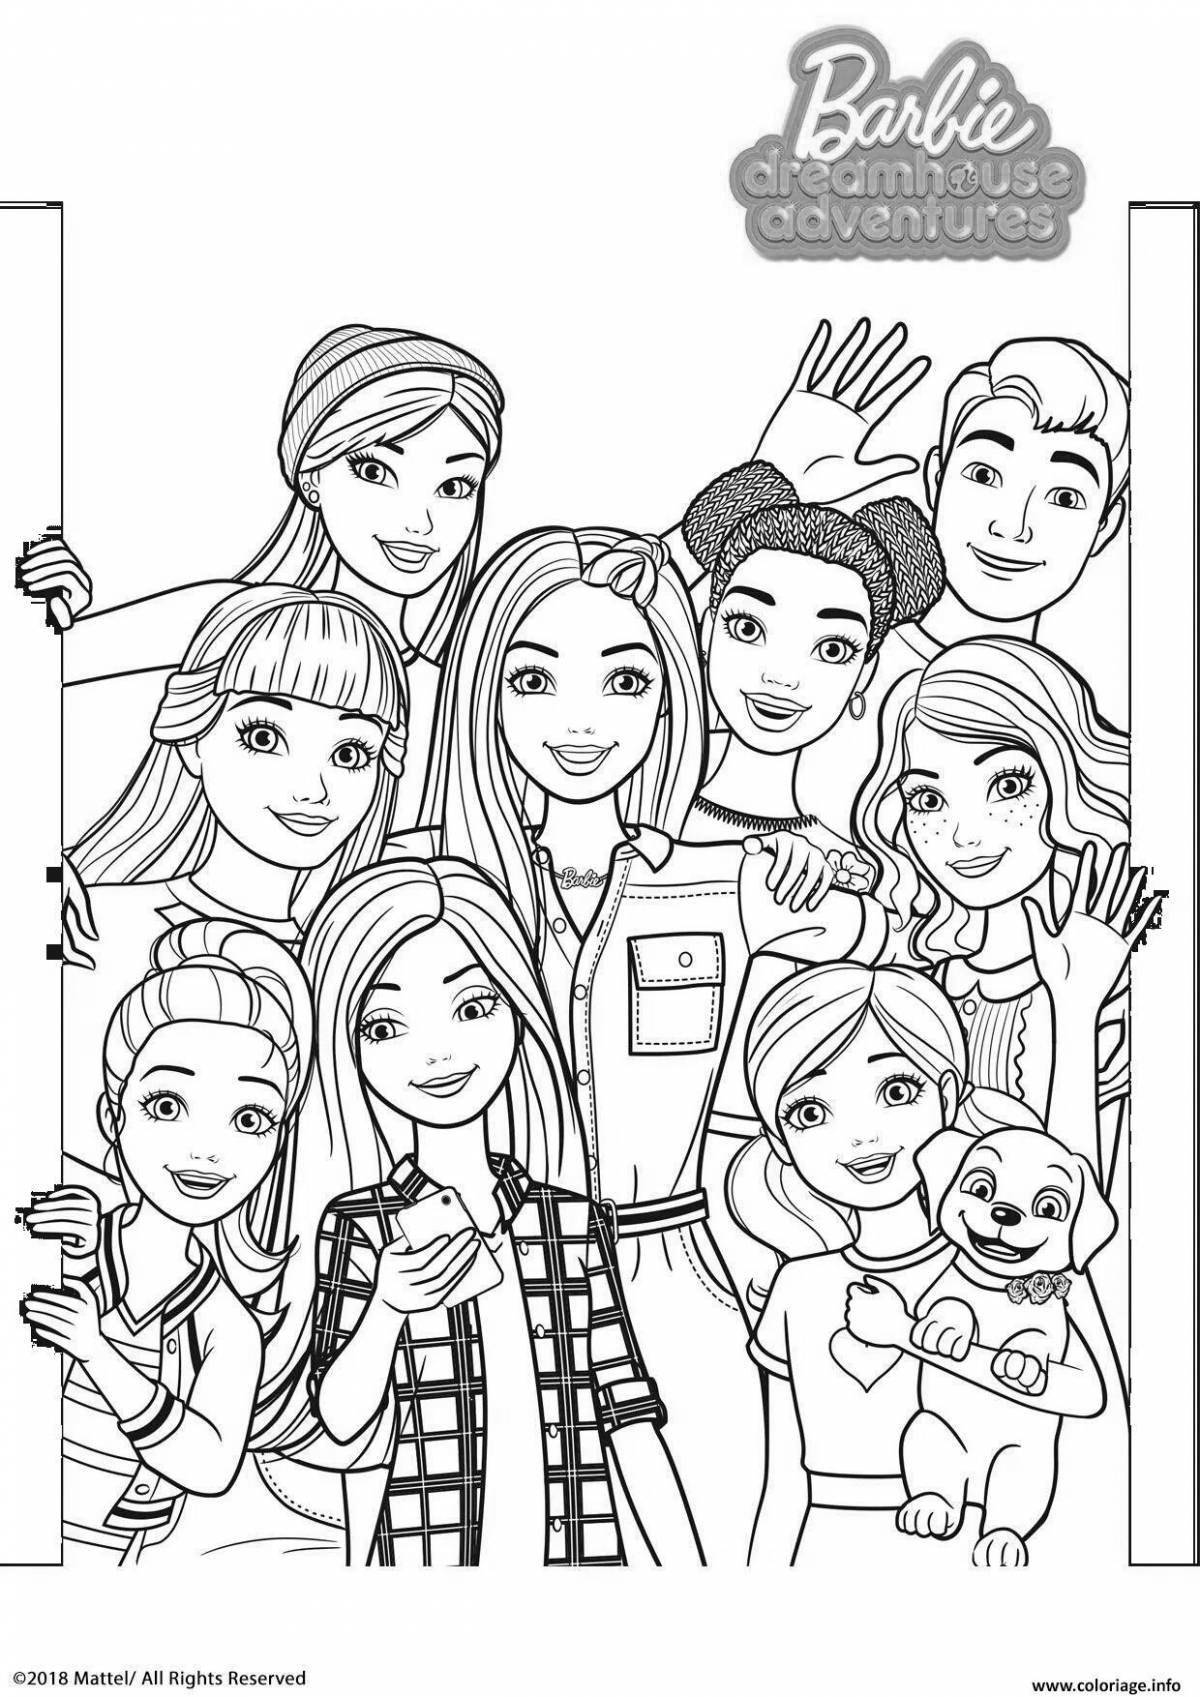 Barbie wild house coloring page